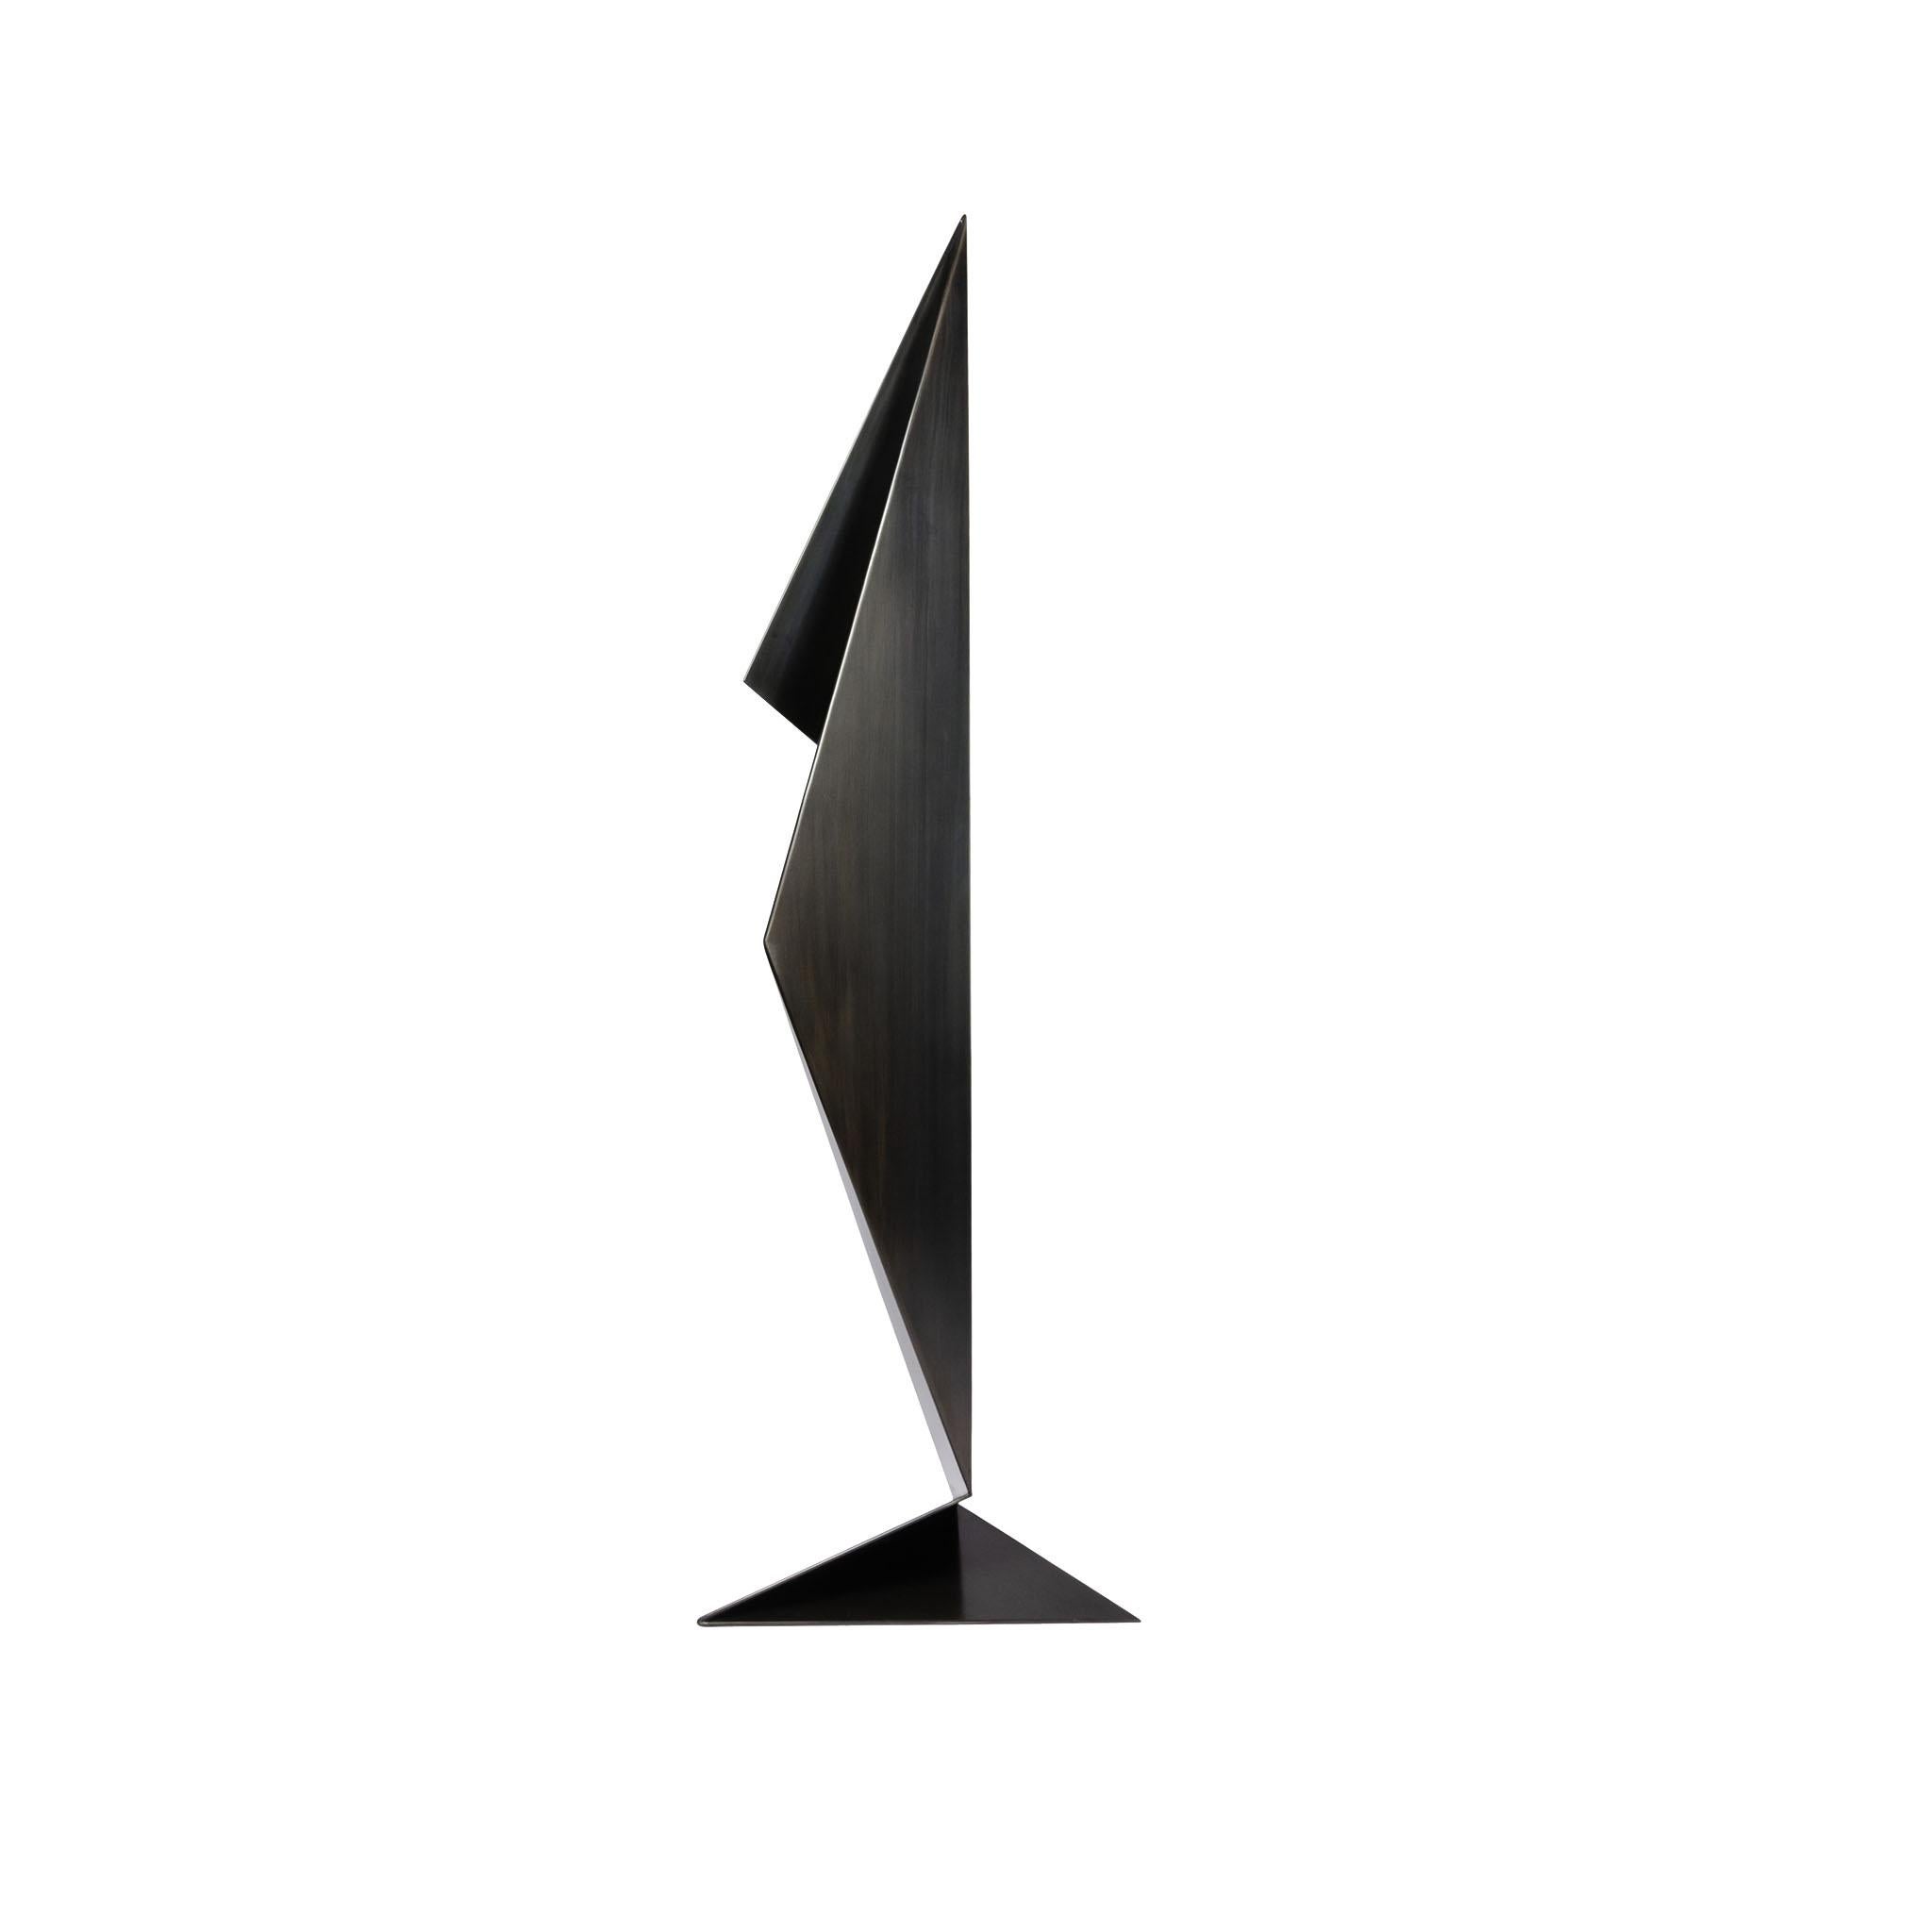 Steel Abstract Origami Metal Sculpture Figure Hand Blackened Finish For Sale